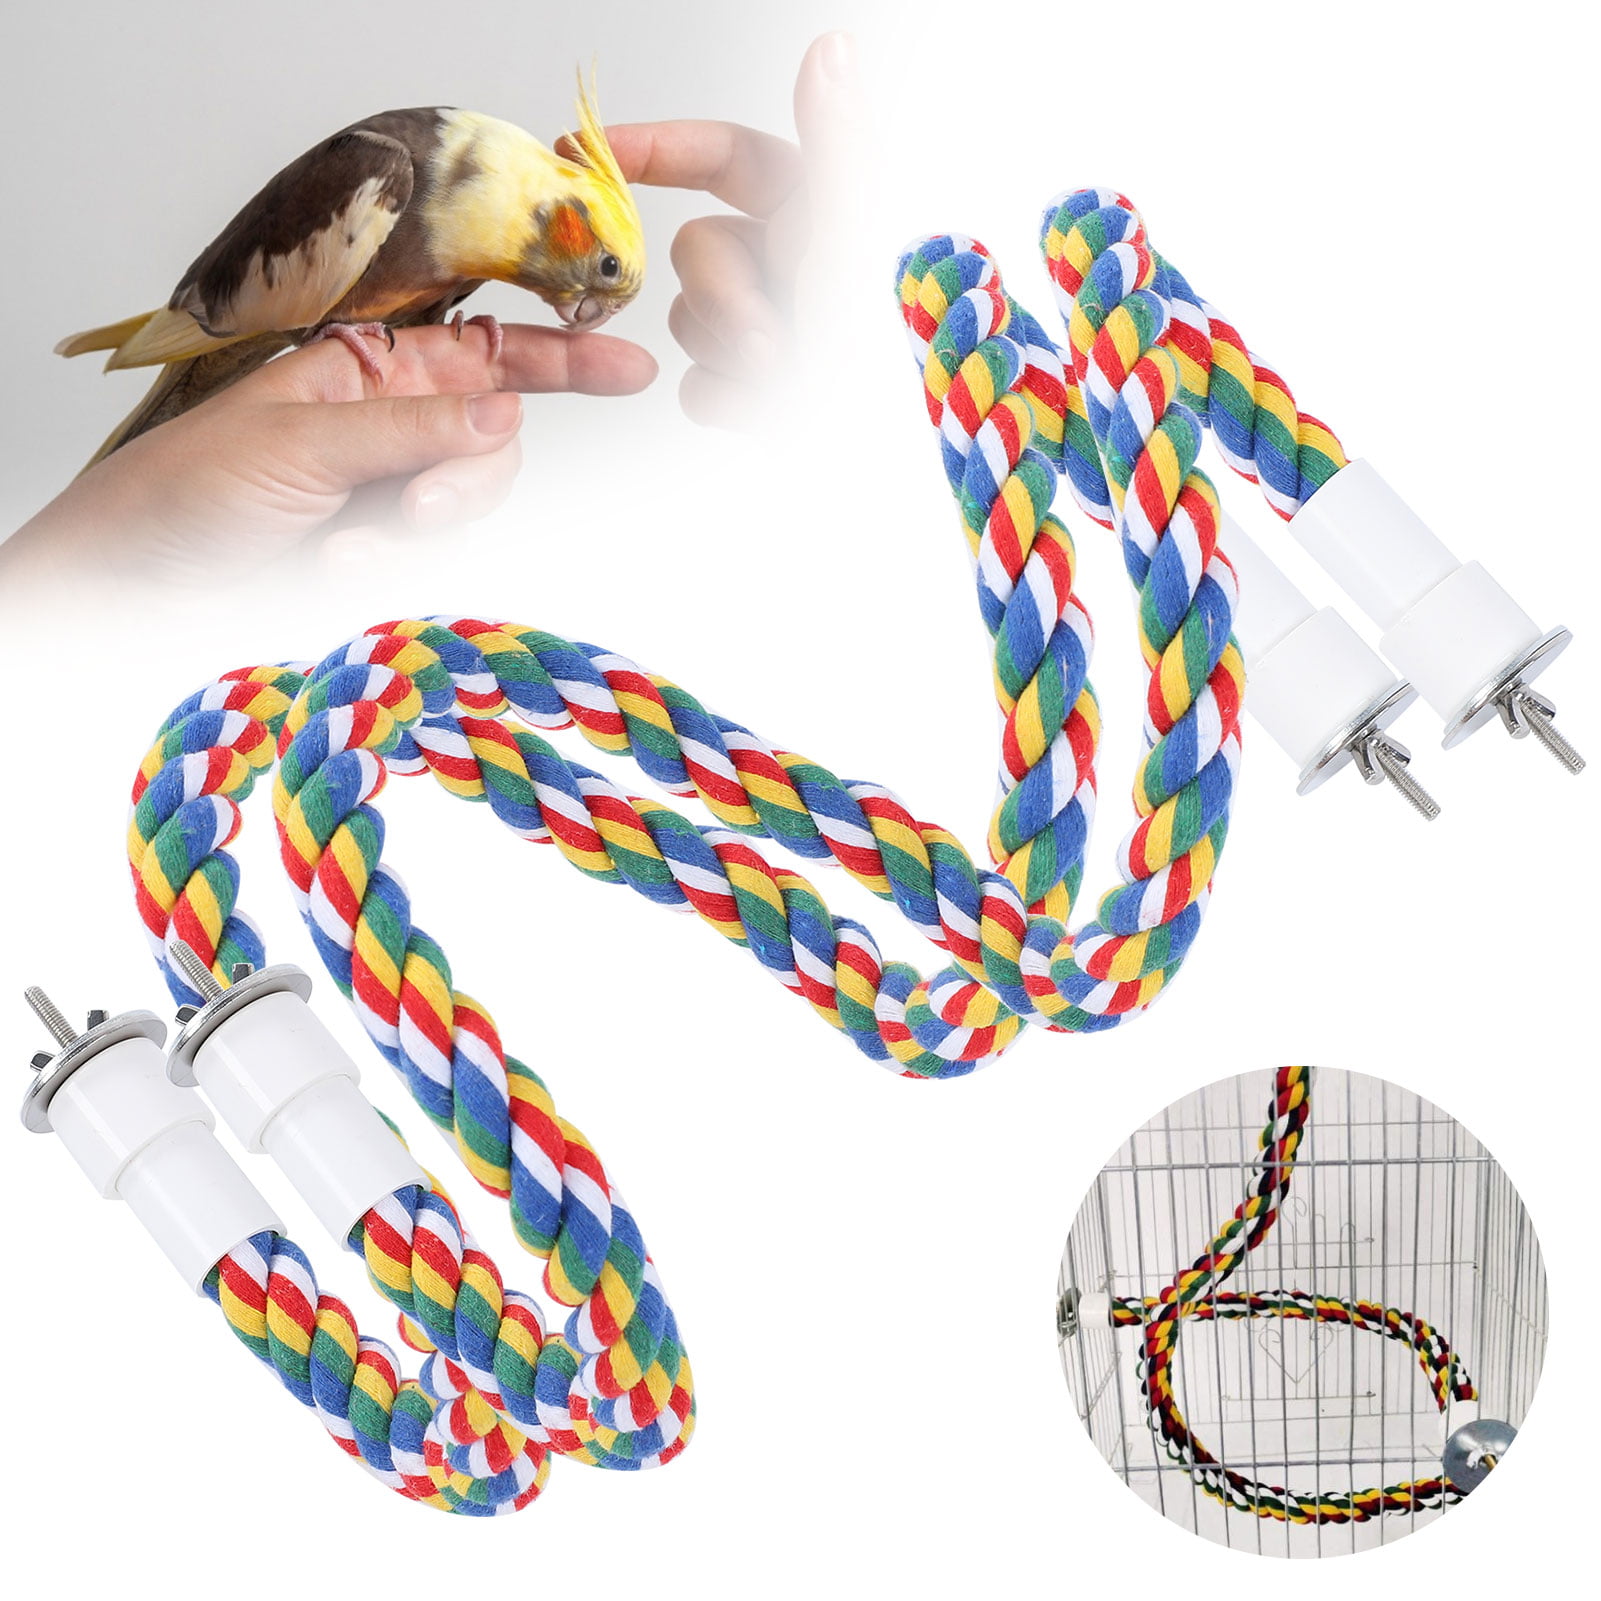 Comfy Bird Cotton Rope Perch 31Inch Macaw Chewing Toy Birdcage Station Pole Both Ends Can Be Fixed Colored Ropes Bend Bungee Natural Rotating Ladder for Cockatiels Finches Macaws Lovebirds 